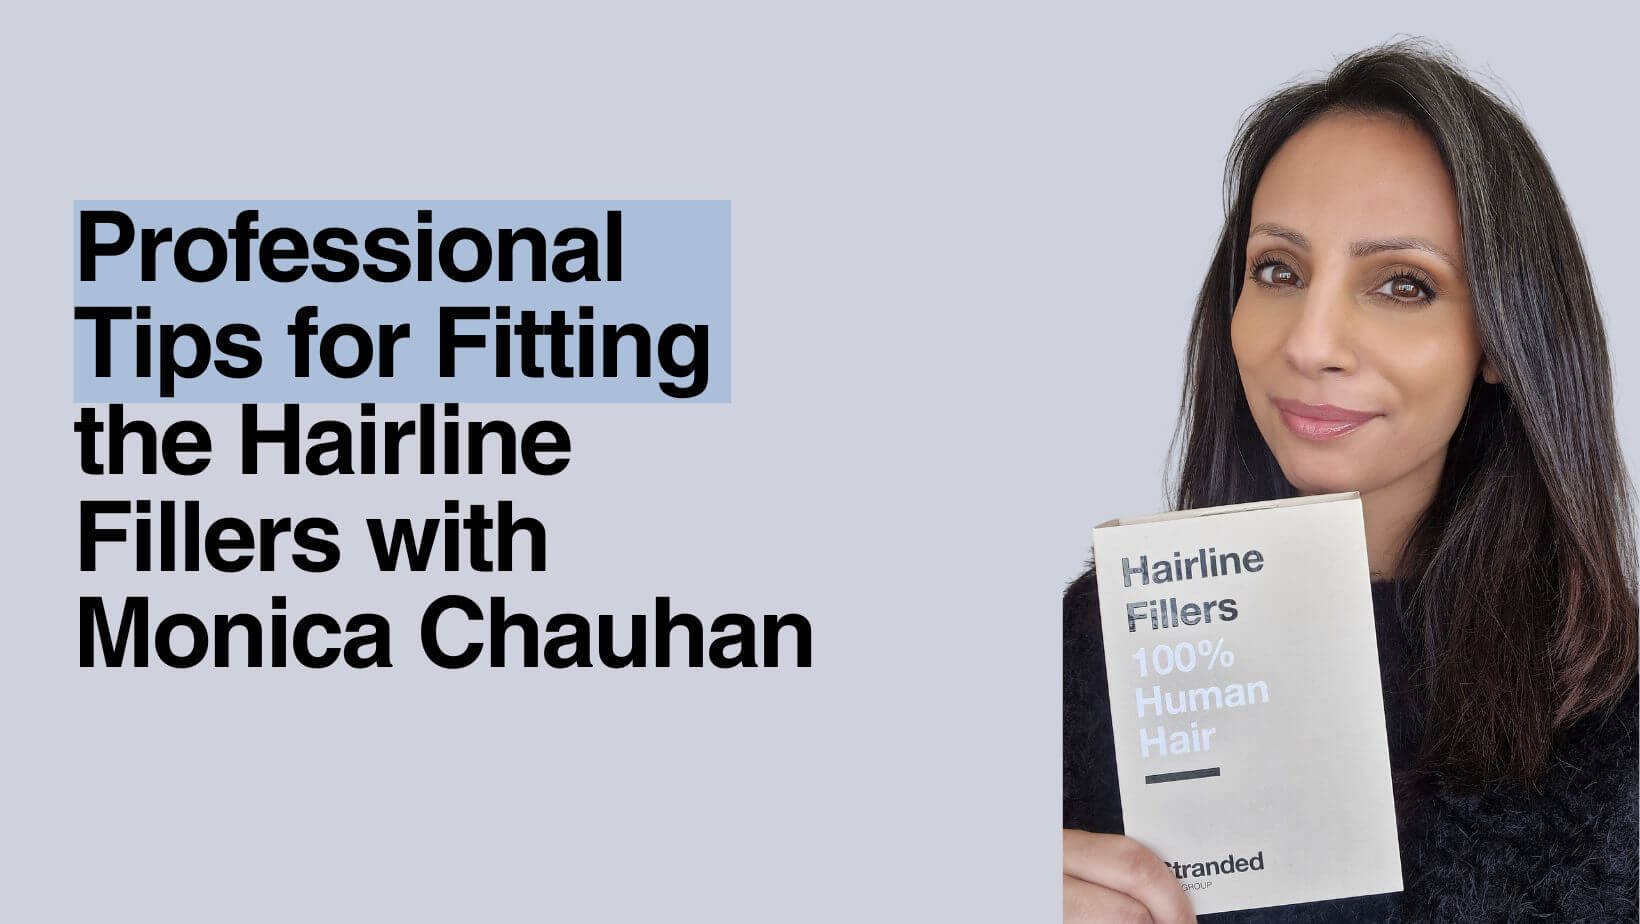 Professional Tips for Fitting the Hairline Fillers with Monica Chauhan